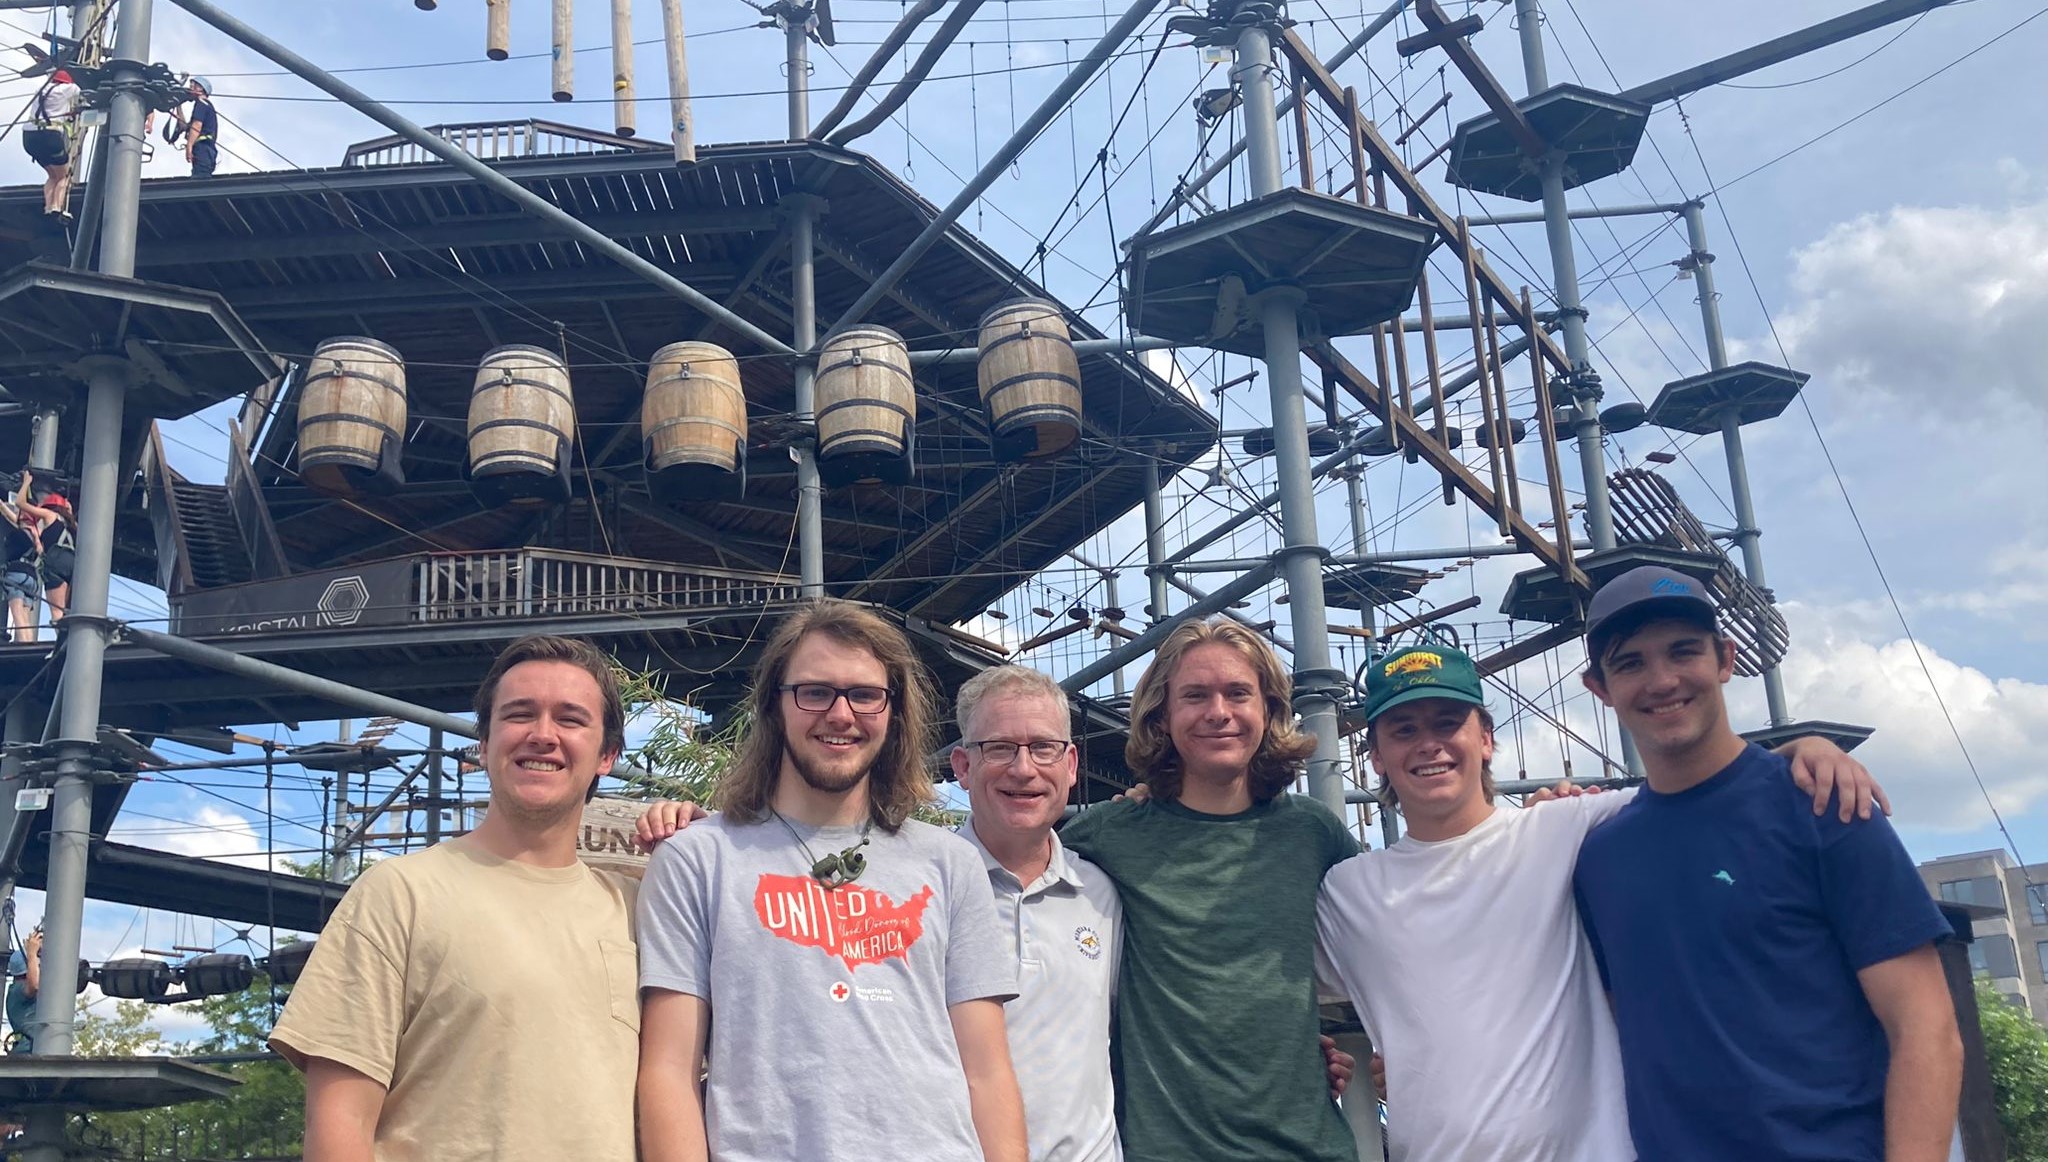 Dr. John Paxton with Computer science students at a ropes course in Germany